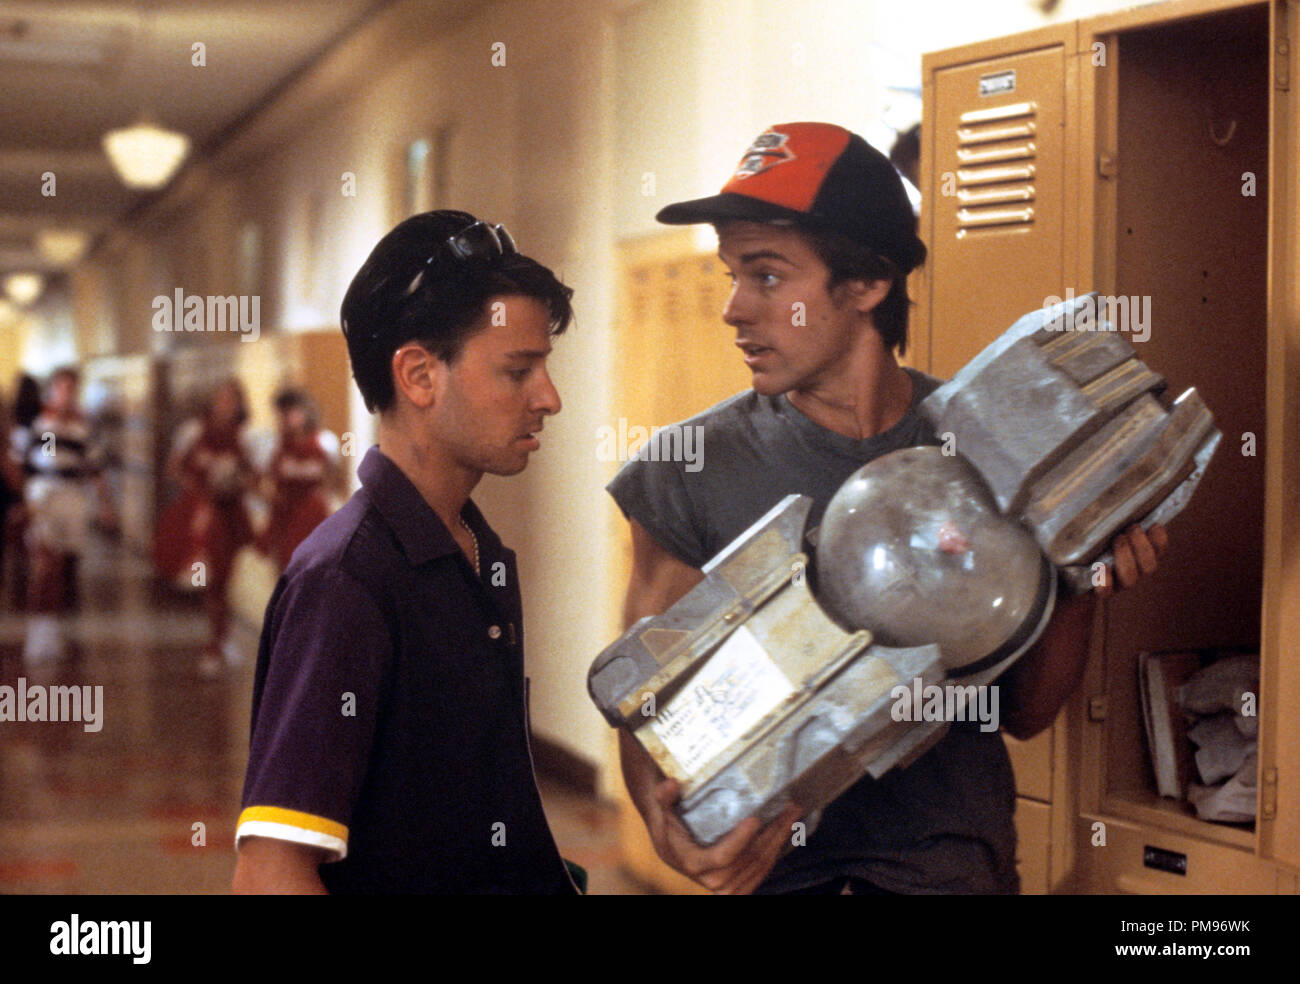 Studio Publicity Still from 'My Science Project' Fisher Stevens, John Stockwell © 1985 Touchstone Pictures  All Rights Reserved   File Reference # 31703210THA  For Editorial Use Only Stock Photo